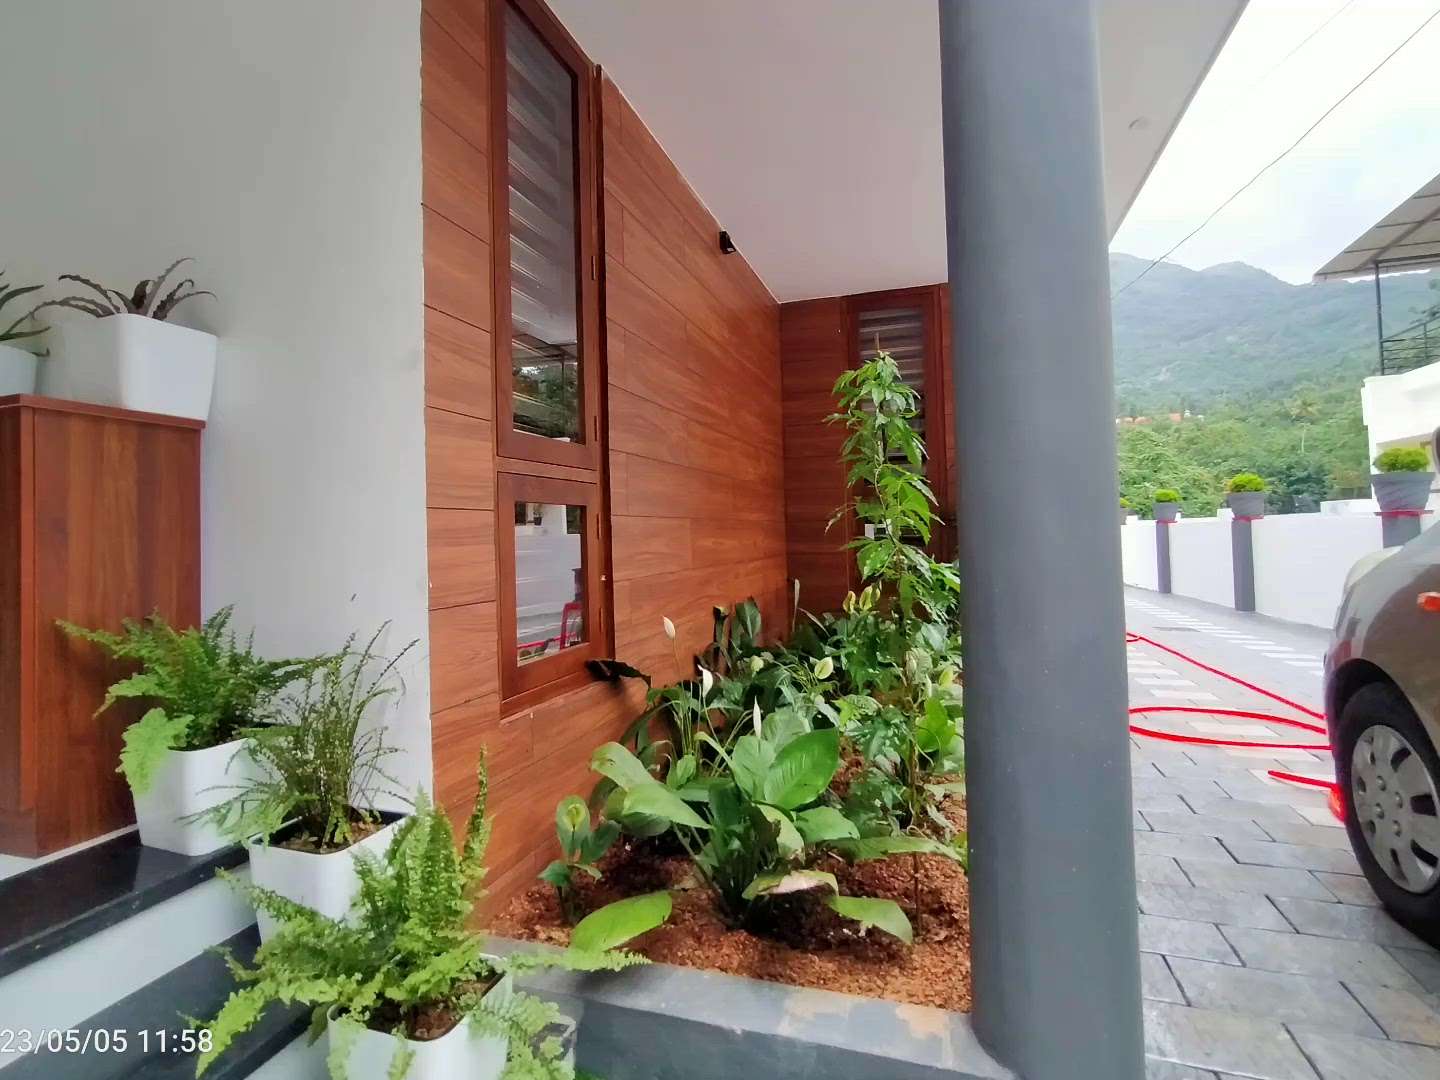 4200/5 bhk/Contemporary style
30 cent/double storey/Idukki

Project Name: 5 bhk,Contemporary style house 
Storey: double
Total Area: 4200
Bed Room: 5 bhk
Elevation Style: Contemporary
Location: Idukki
Completed Year: 

Cost: 1  cr
Plot Size: 30 cent